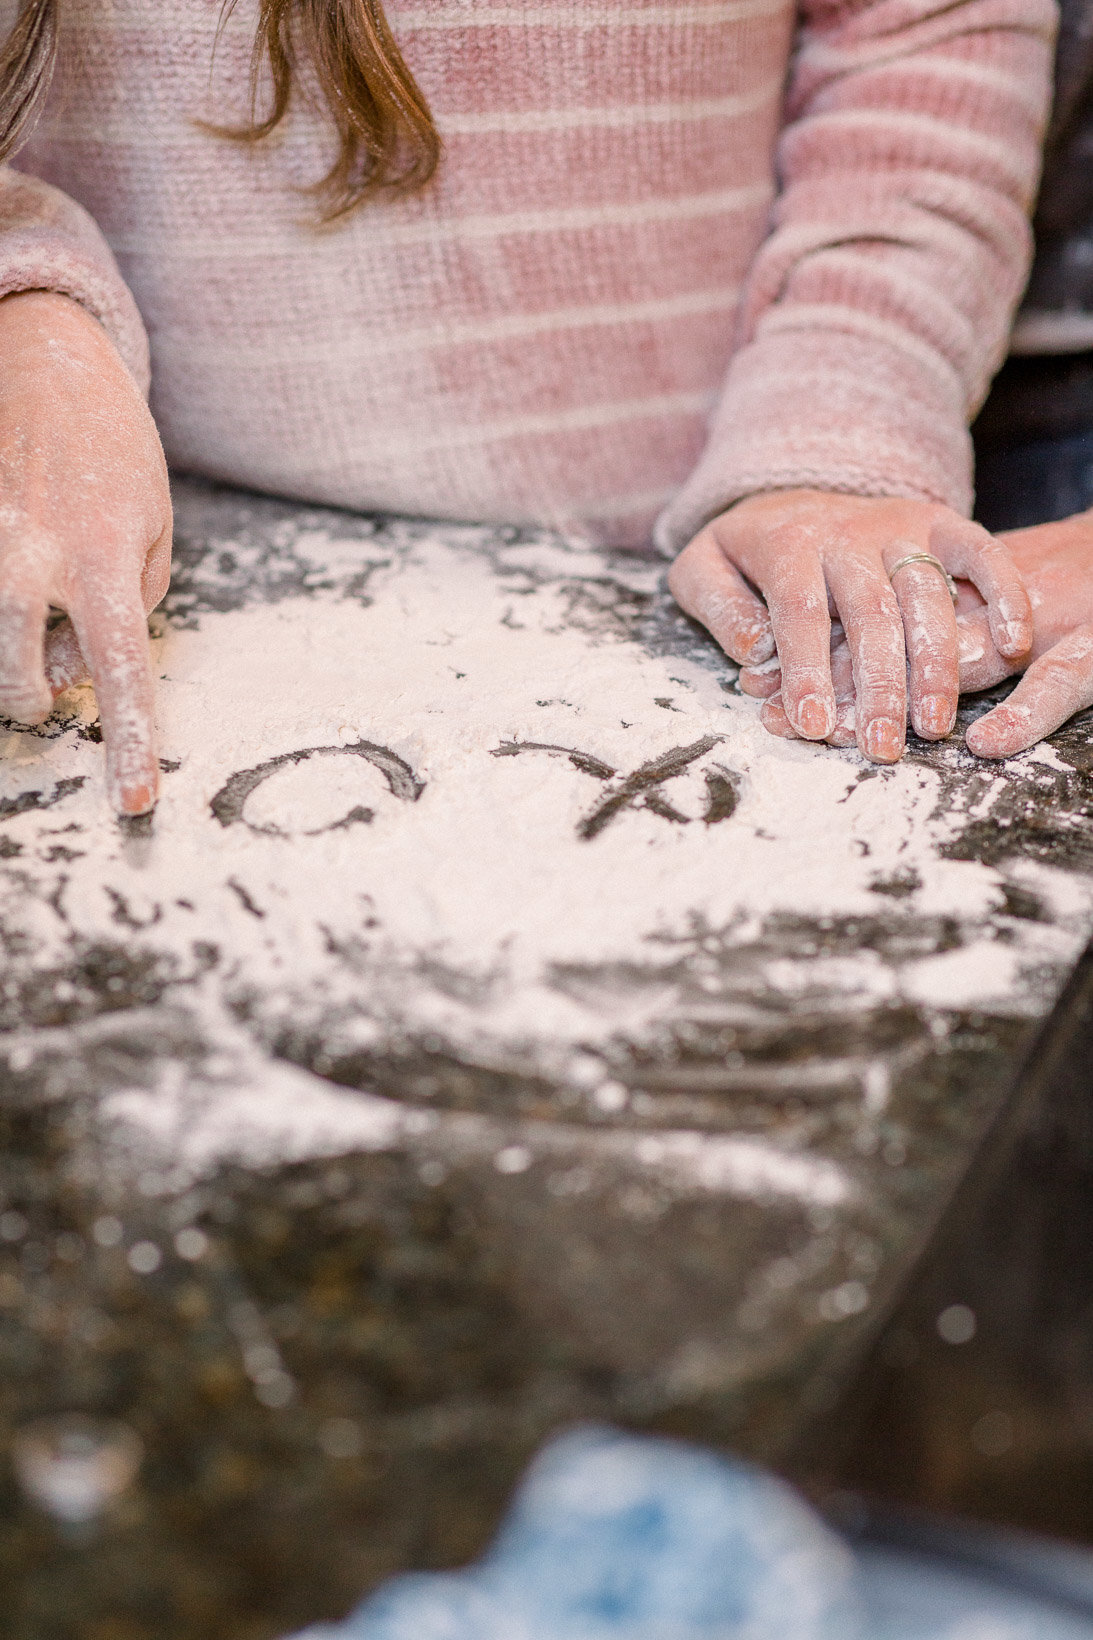 Writing cute notes in the flour captured by Staci Addison Photography